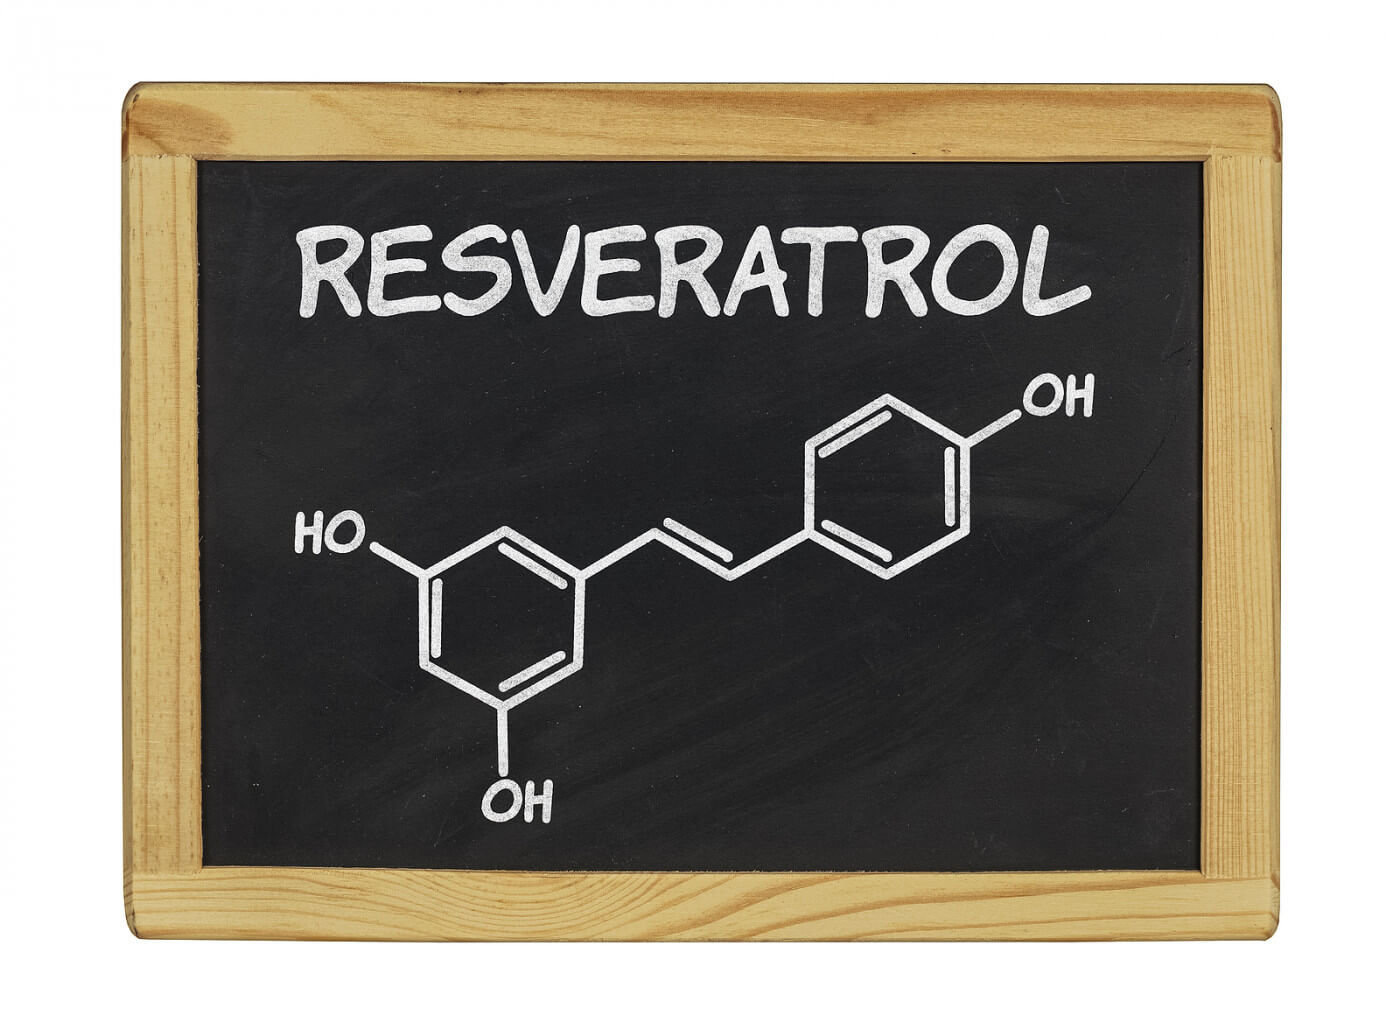 The Resveratrol Forum In The New York Academy of Sciences